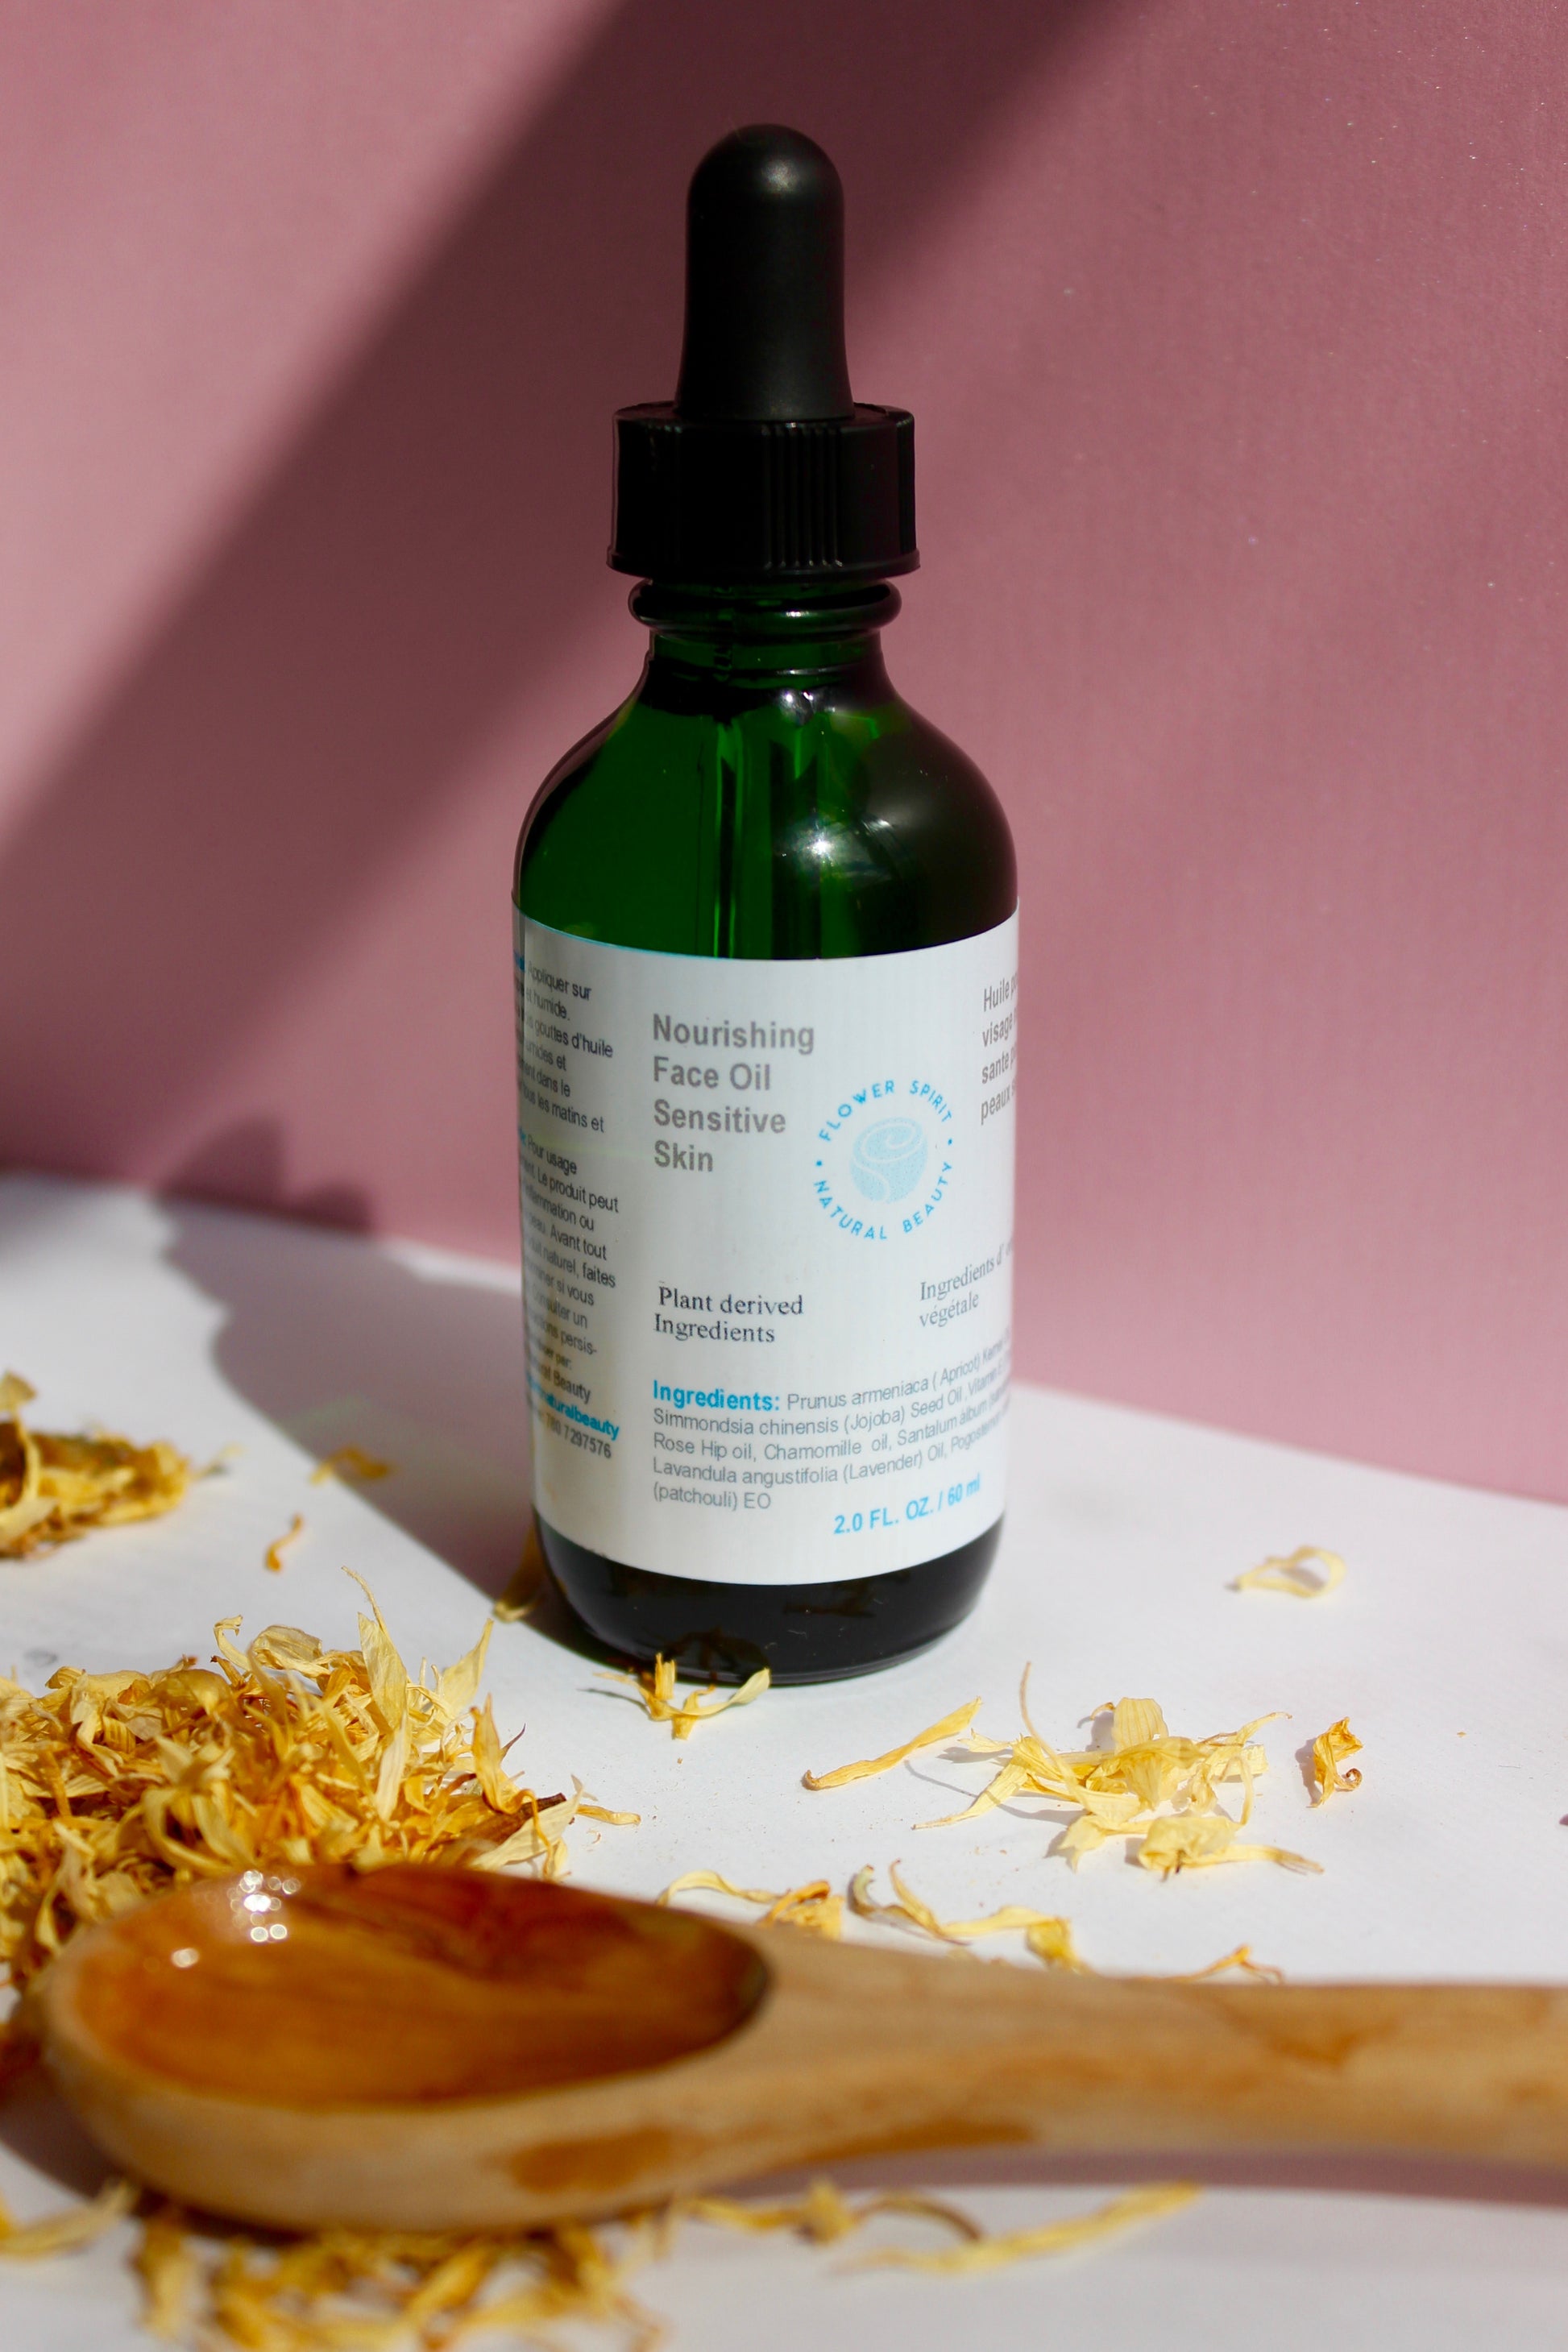 Nourishing Face Oil for Sensitive Skin By Flower Spirit Natural Beauty. formulated with a mixture of plant base oils and essential oils to hydrate and balance sensitive skin. 